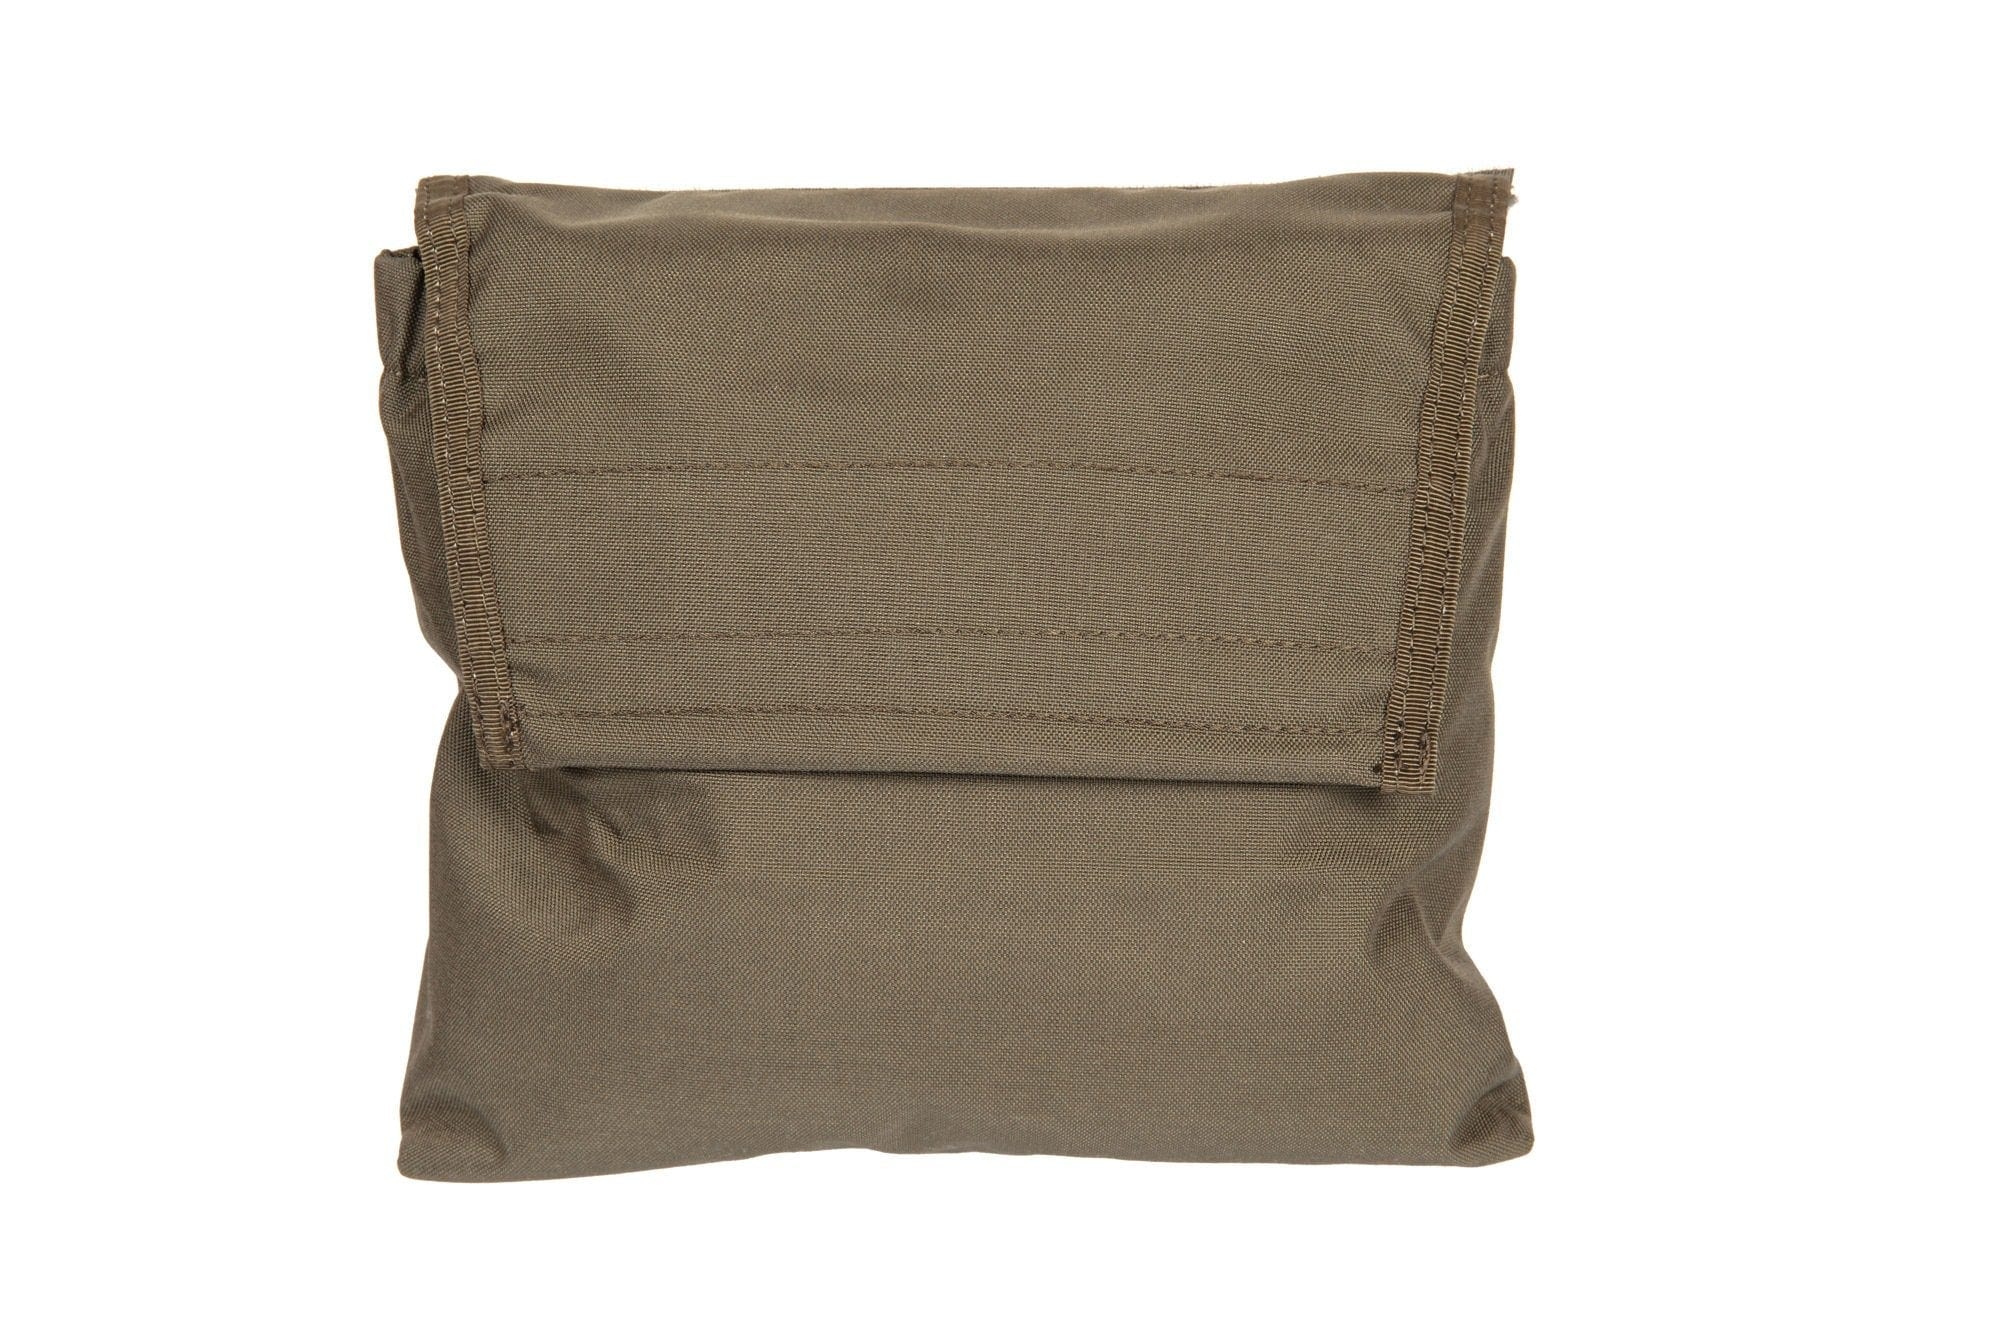 Paste Pouch for Vest / Tactical Belt - Ranger Green by Emerson Gear on Airsoft Mania Europe